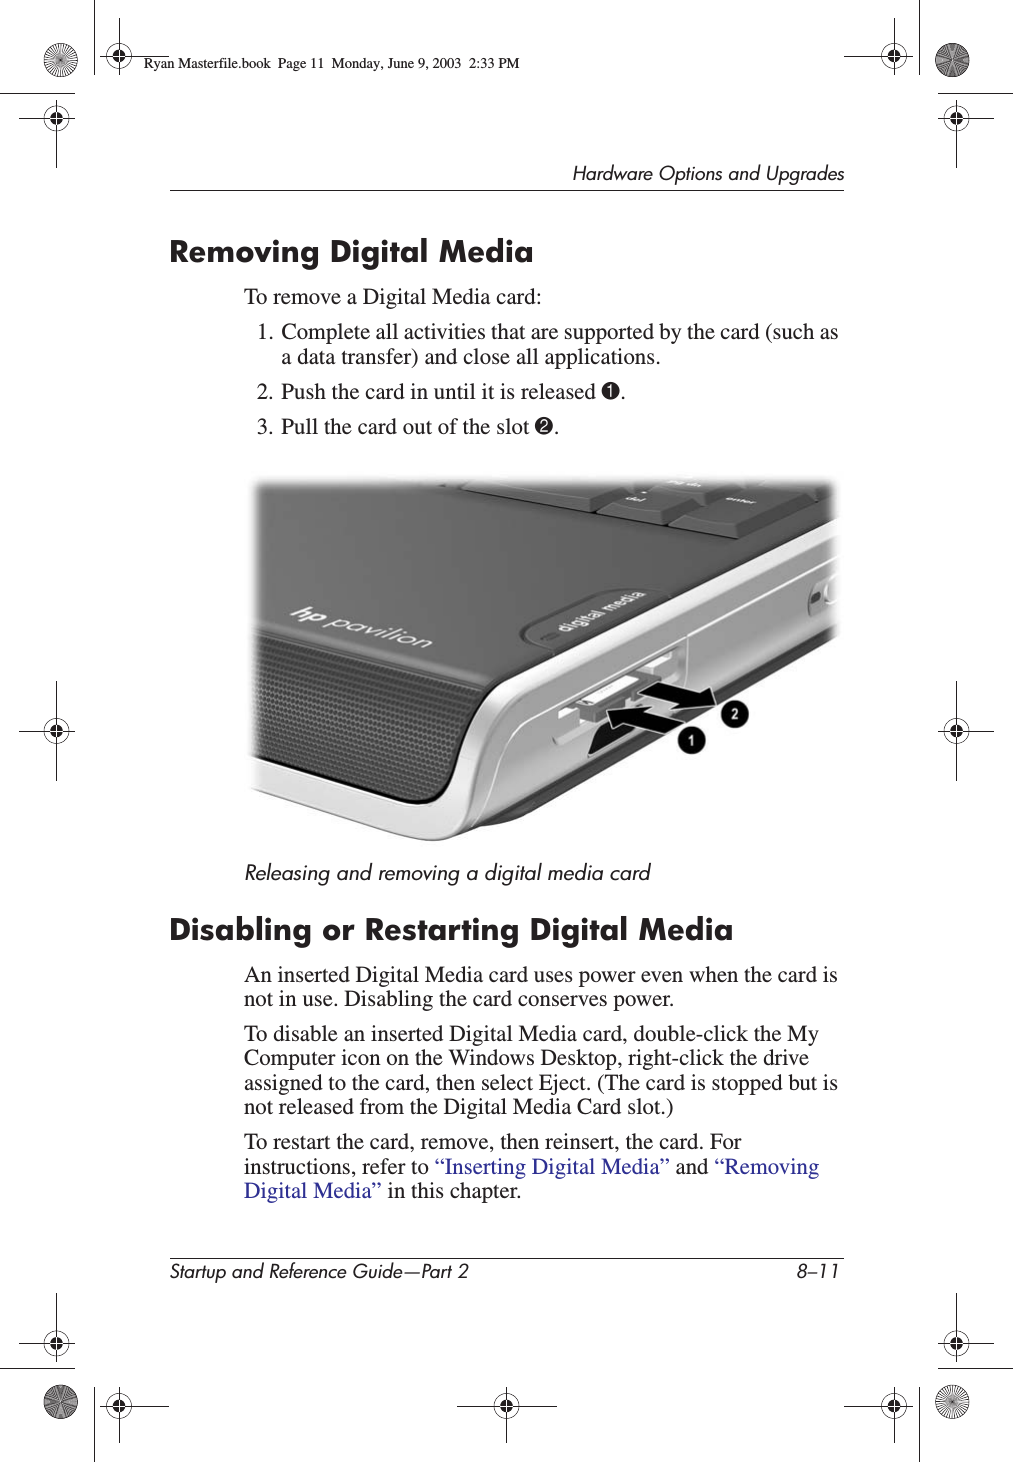 Hardware Options and UpgradesStartup and Reference Guide—Part 2 8–11Removing Digital MediaTo remove a Digital Media card:1. Complete all activities that are supported by the card (such as a data transfer) and close all applications. 2. Push the card in until it is released 1.3. Pull the card out of the slot 2.Releasing and removing a digital media cardDisabling or Restarting Digital MediaAn inserted Digital Media card uses power even when the card is not in use. Disabling the card conserves power.To disable an inserted Digital Media card, double-click the My Computer icon on the Windows Desktop, right-click the drive assigned to the card, then select Eject. (The card is stopped but is not released from the Digital Media Card slot.)To restart the card, remove, then reinsert, the card. For instructions, refer to “Inserting Digital Media” and “Removing Digital Media” in this chapter.Ryan Masterfile.book  Page 11  Monday, June 9, 2003  2:33 PM